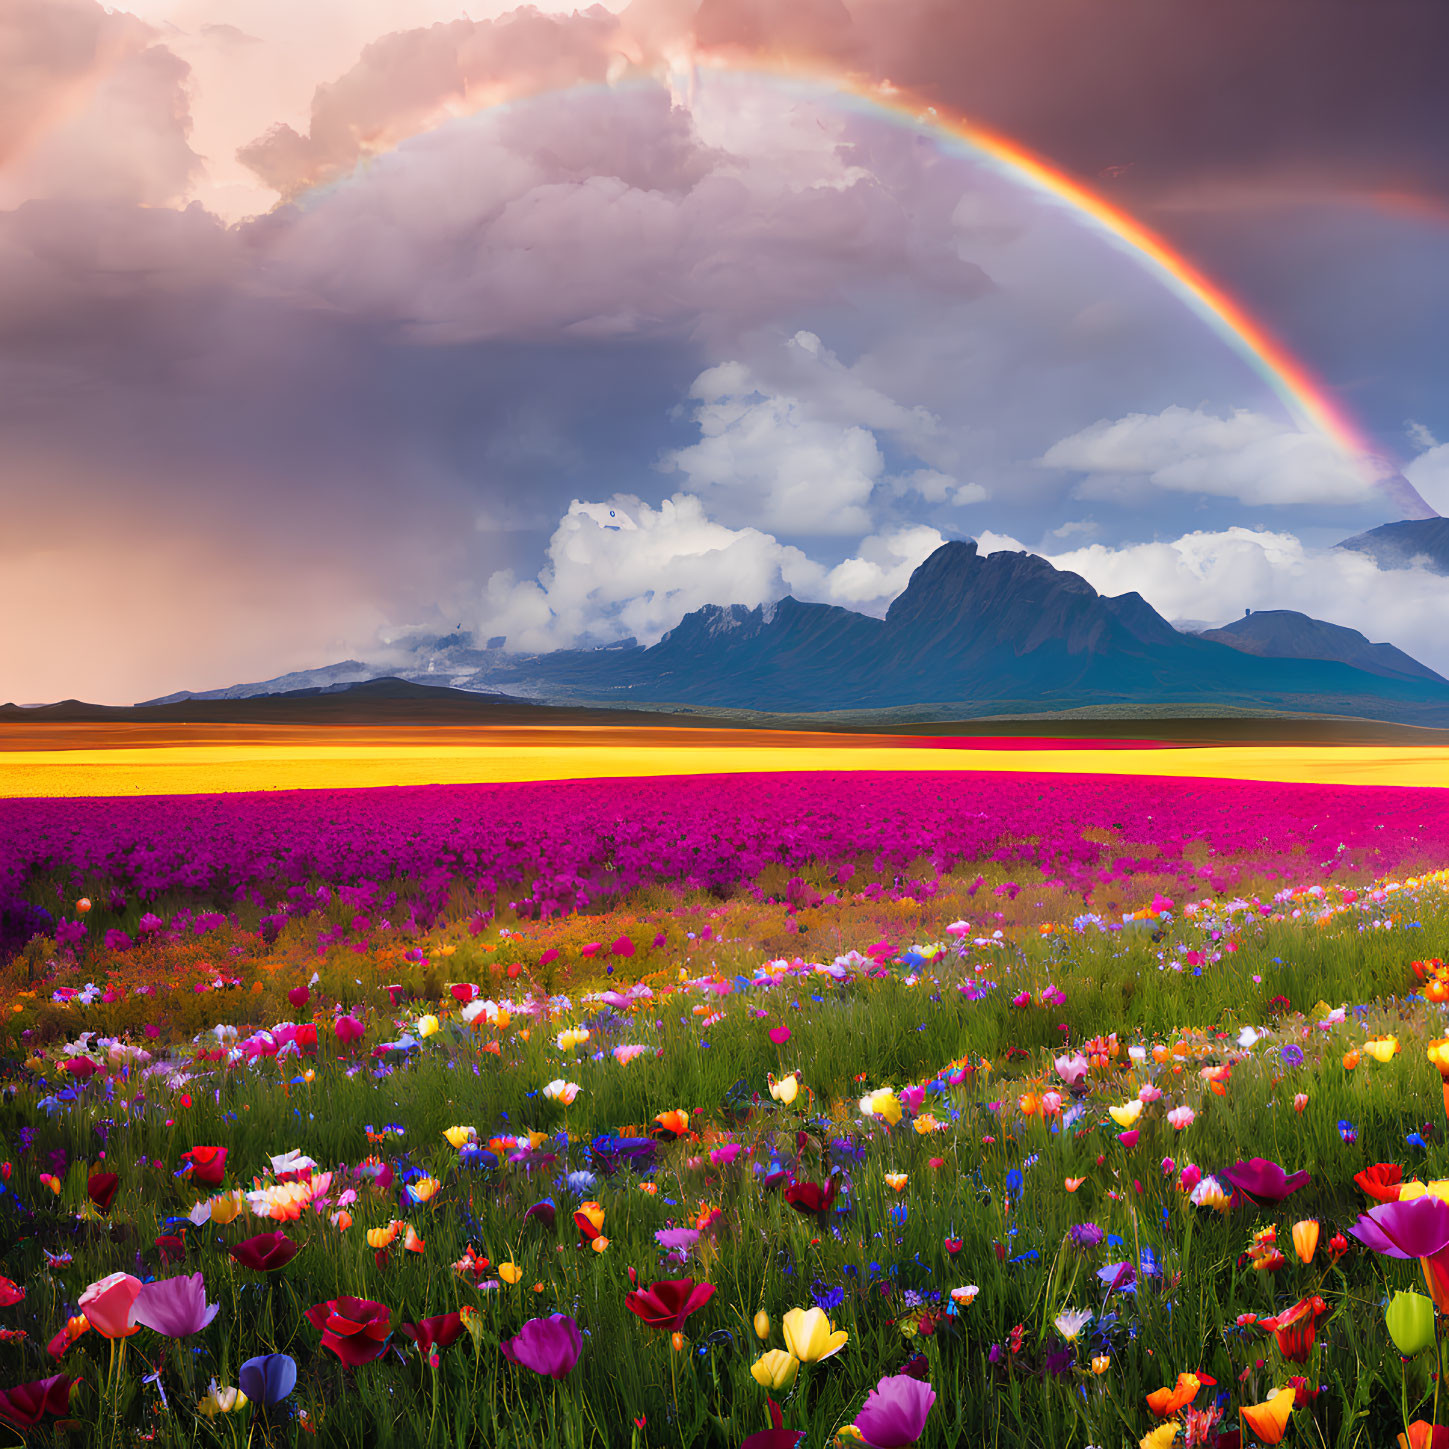 Colorful Flower Field with Rainbow and Stormy Sky over Mountains